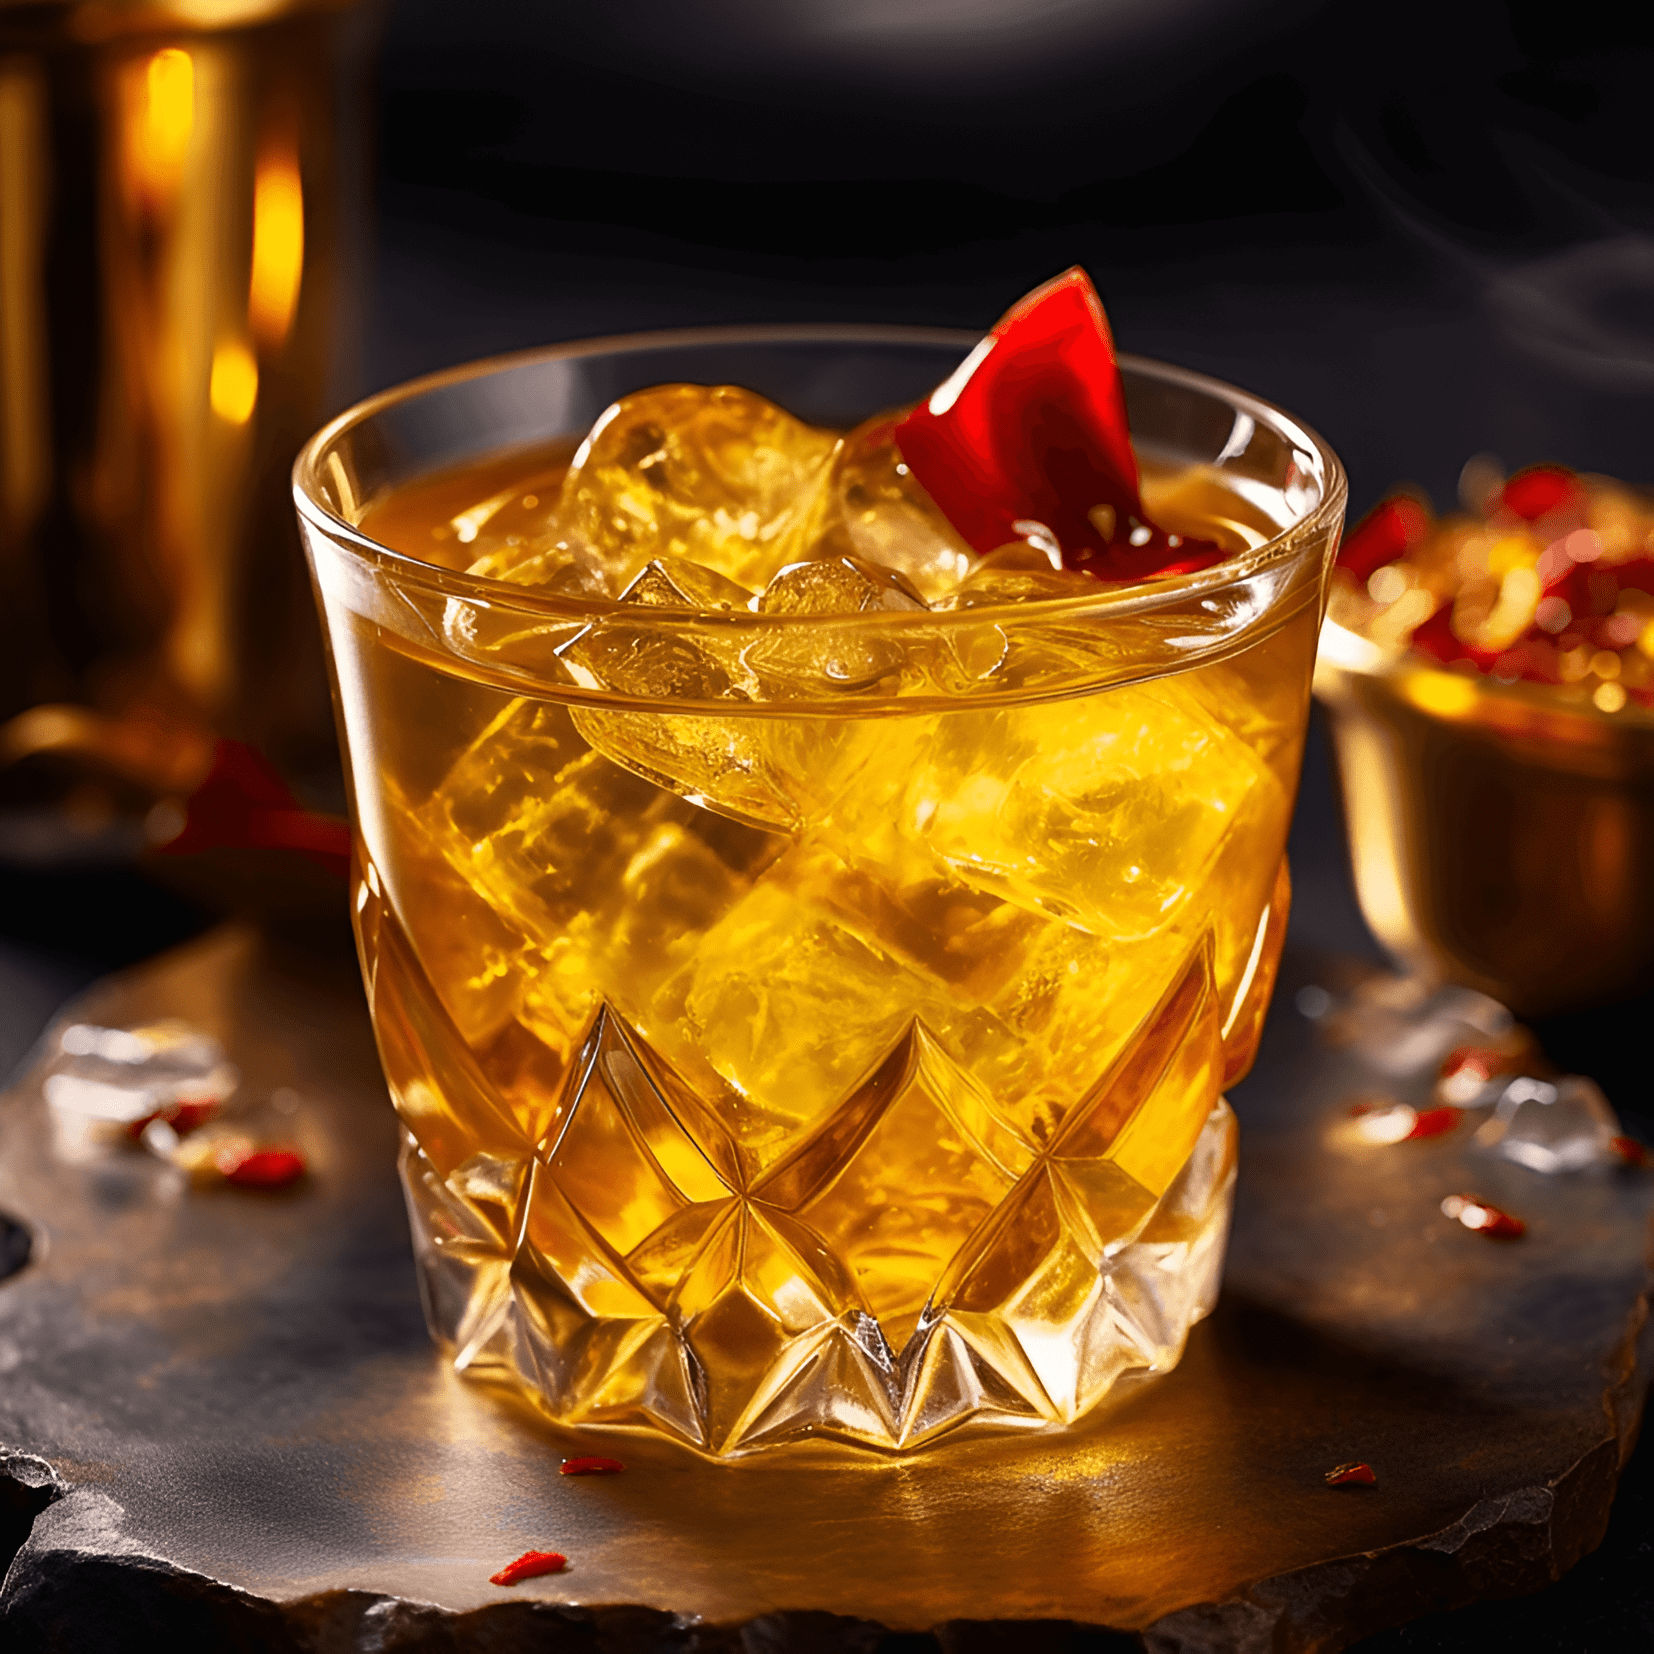 The Aztec Gold cocktail is a harmonious blend of sweet, sour, and spicy flavors. The sweetness of the honey and the tartness of the lime juice are perfectly balanced by the warmth of the tequila and the heat of the chili pepper. The result is a bold, invigorating, and unforgettable taste experience.